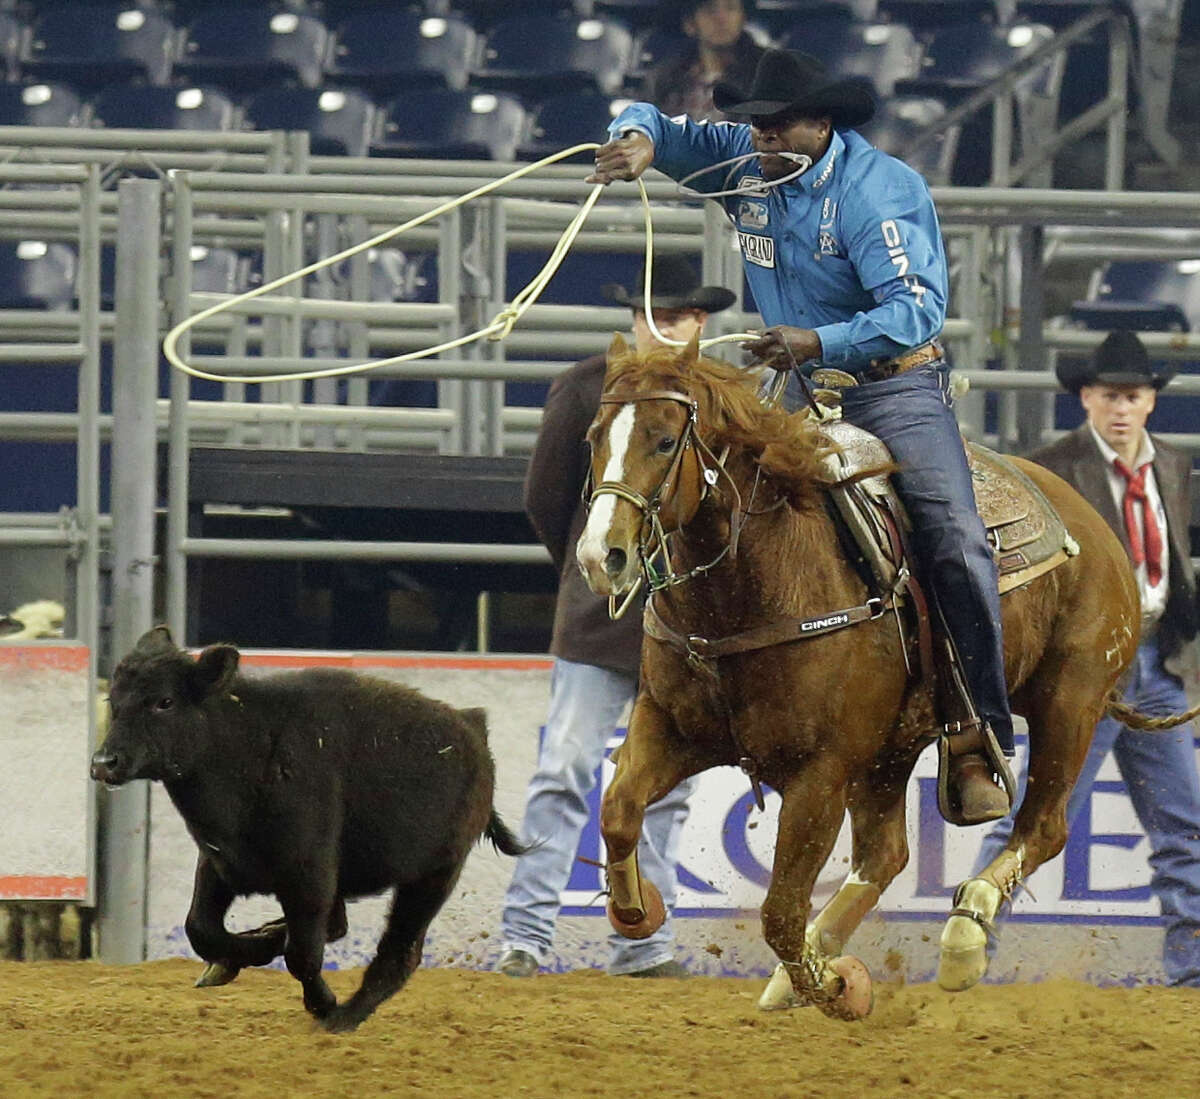 Fred Whitfield of Hockley competes in the tie-down roping event during RodeoHouston at the Houston Livestock Show and Rodeo in NRG Stadium Sunday, March 8, 2015, in Houston.